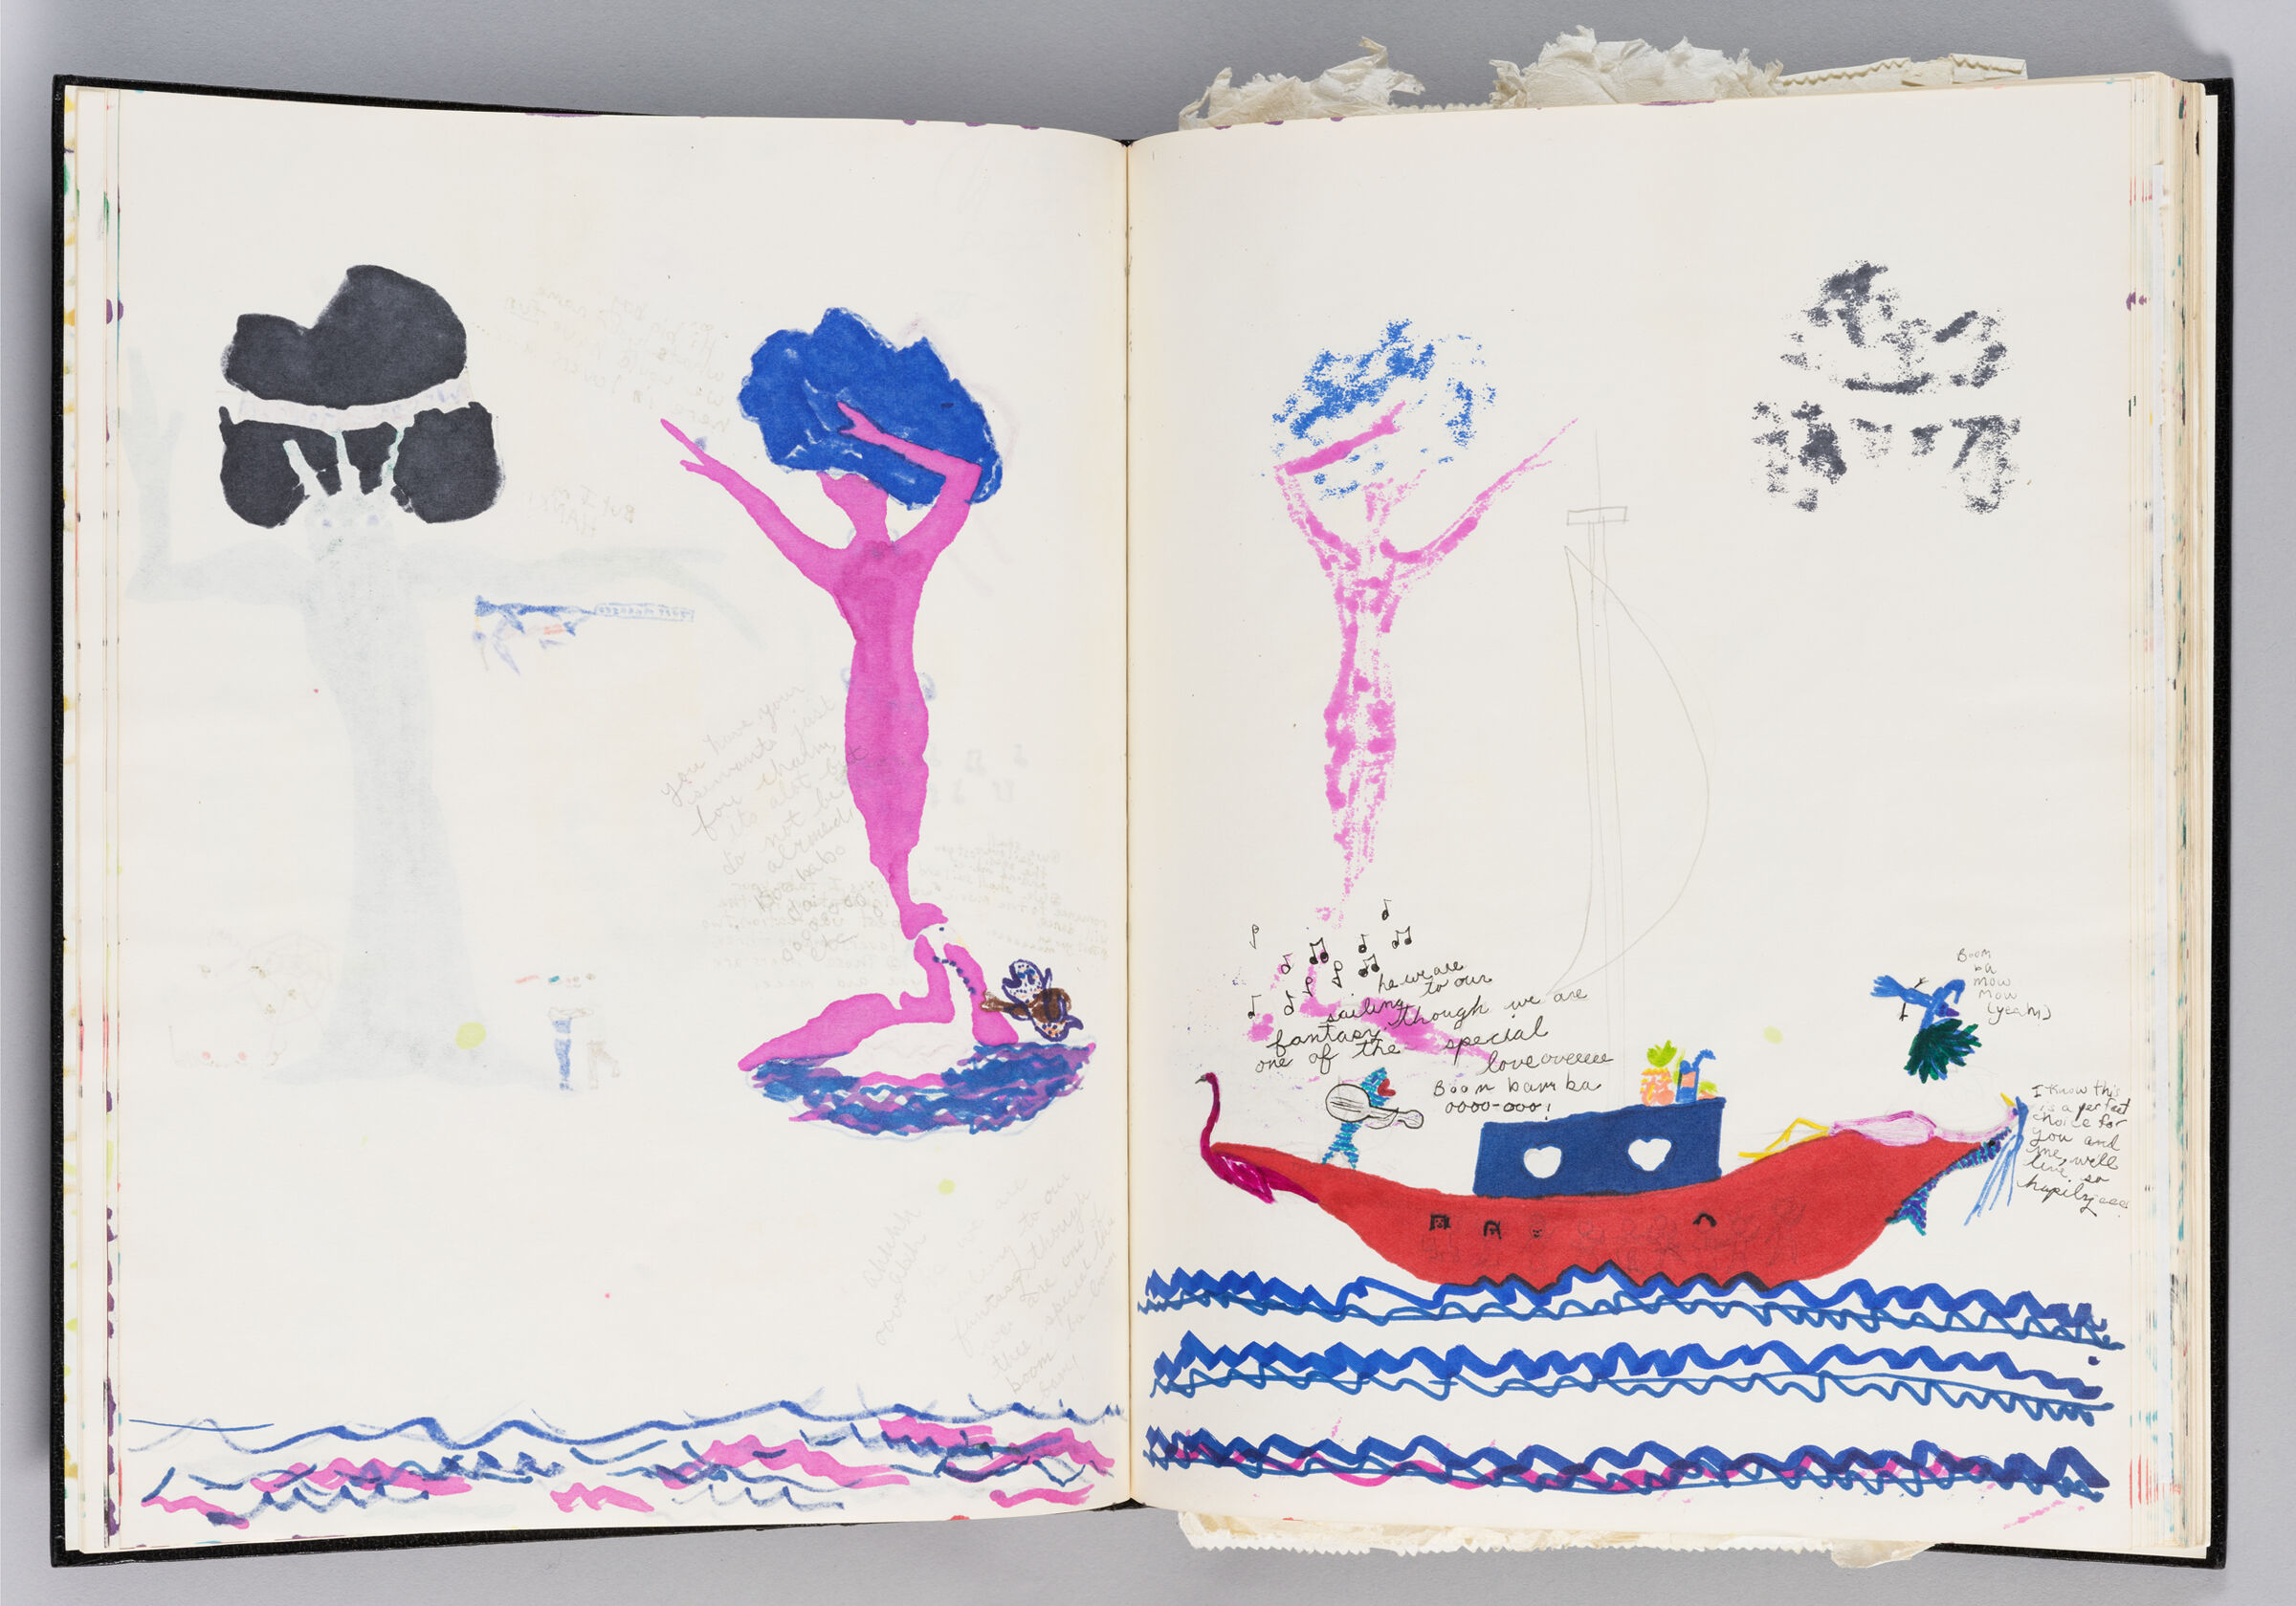 Untitled (Bleed-Through Of Previous Page And Color Transfer, Left Page); Untitled (Children's Drawing And Color Transfer, Right Page)
